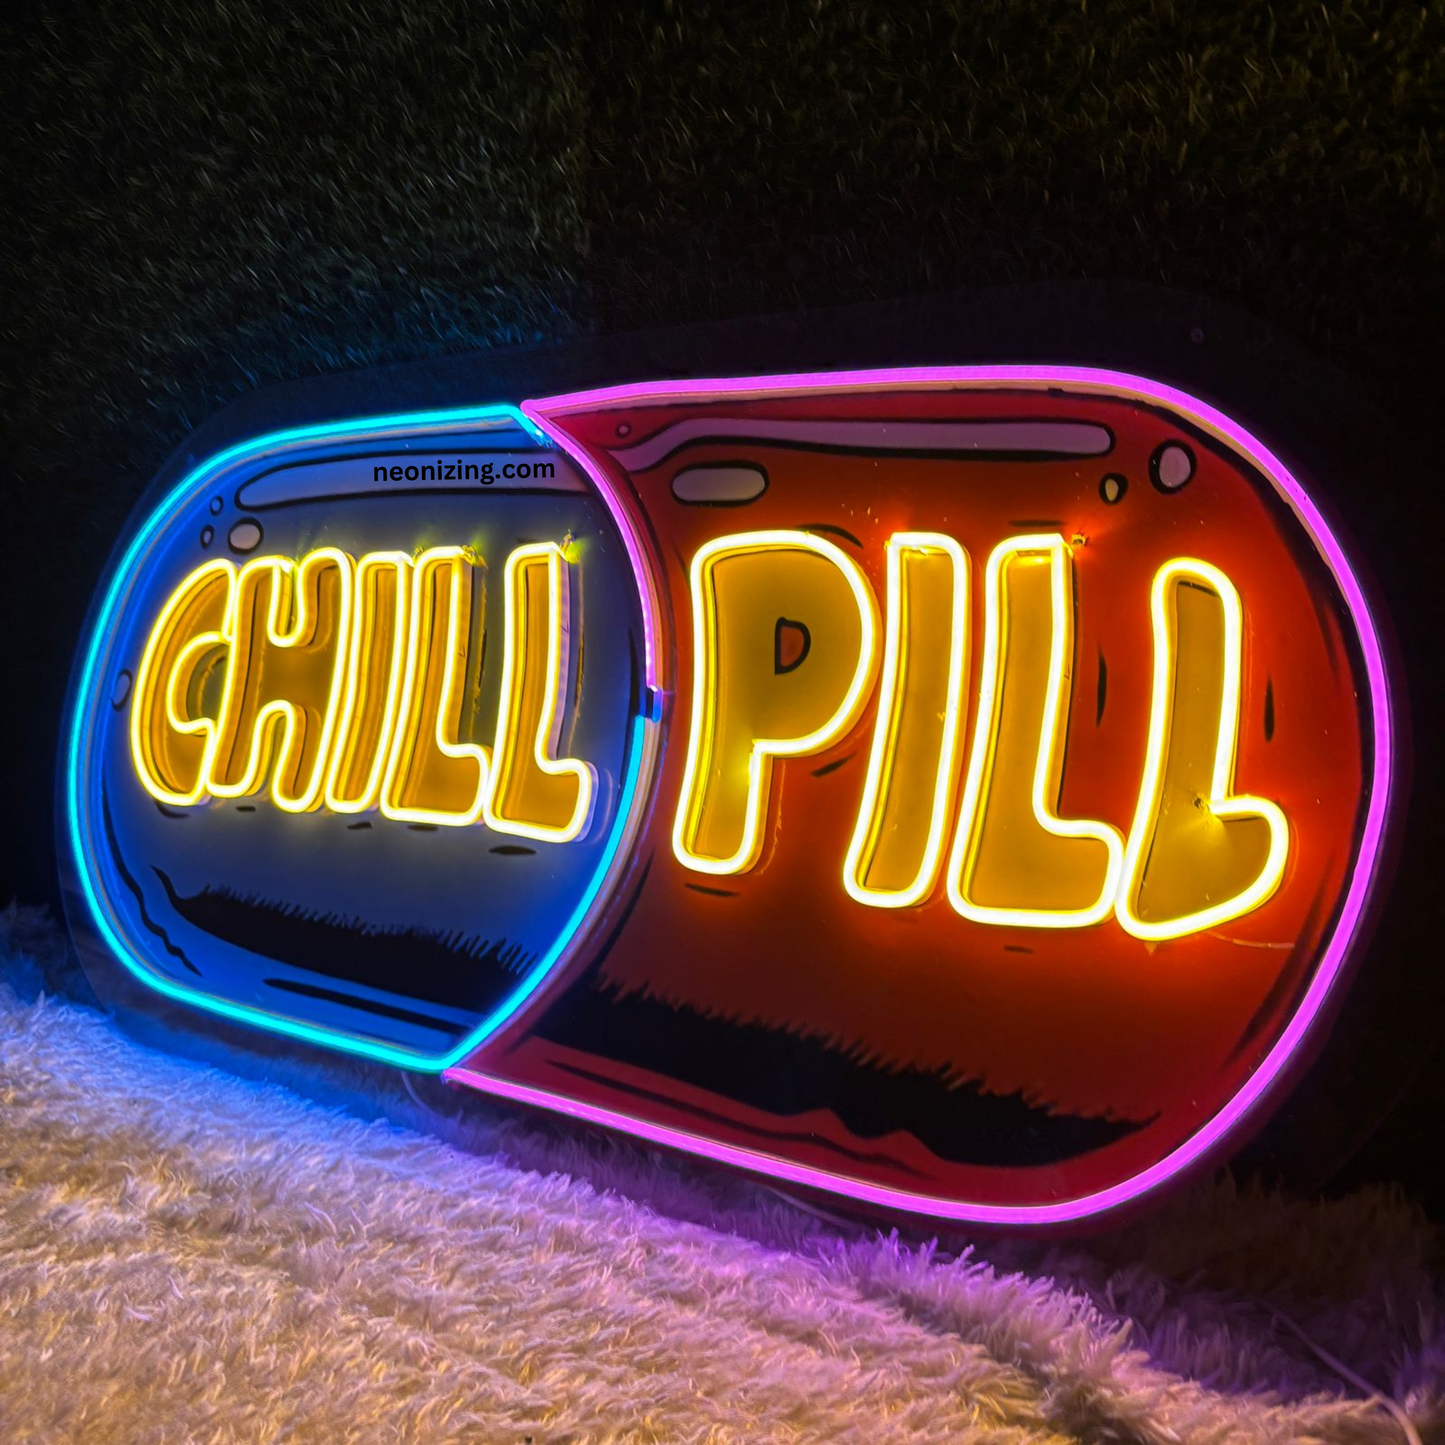 Chill Pill Neon Artwork - Neon Harmony for Relaxation